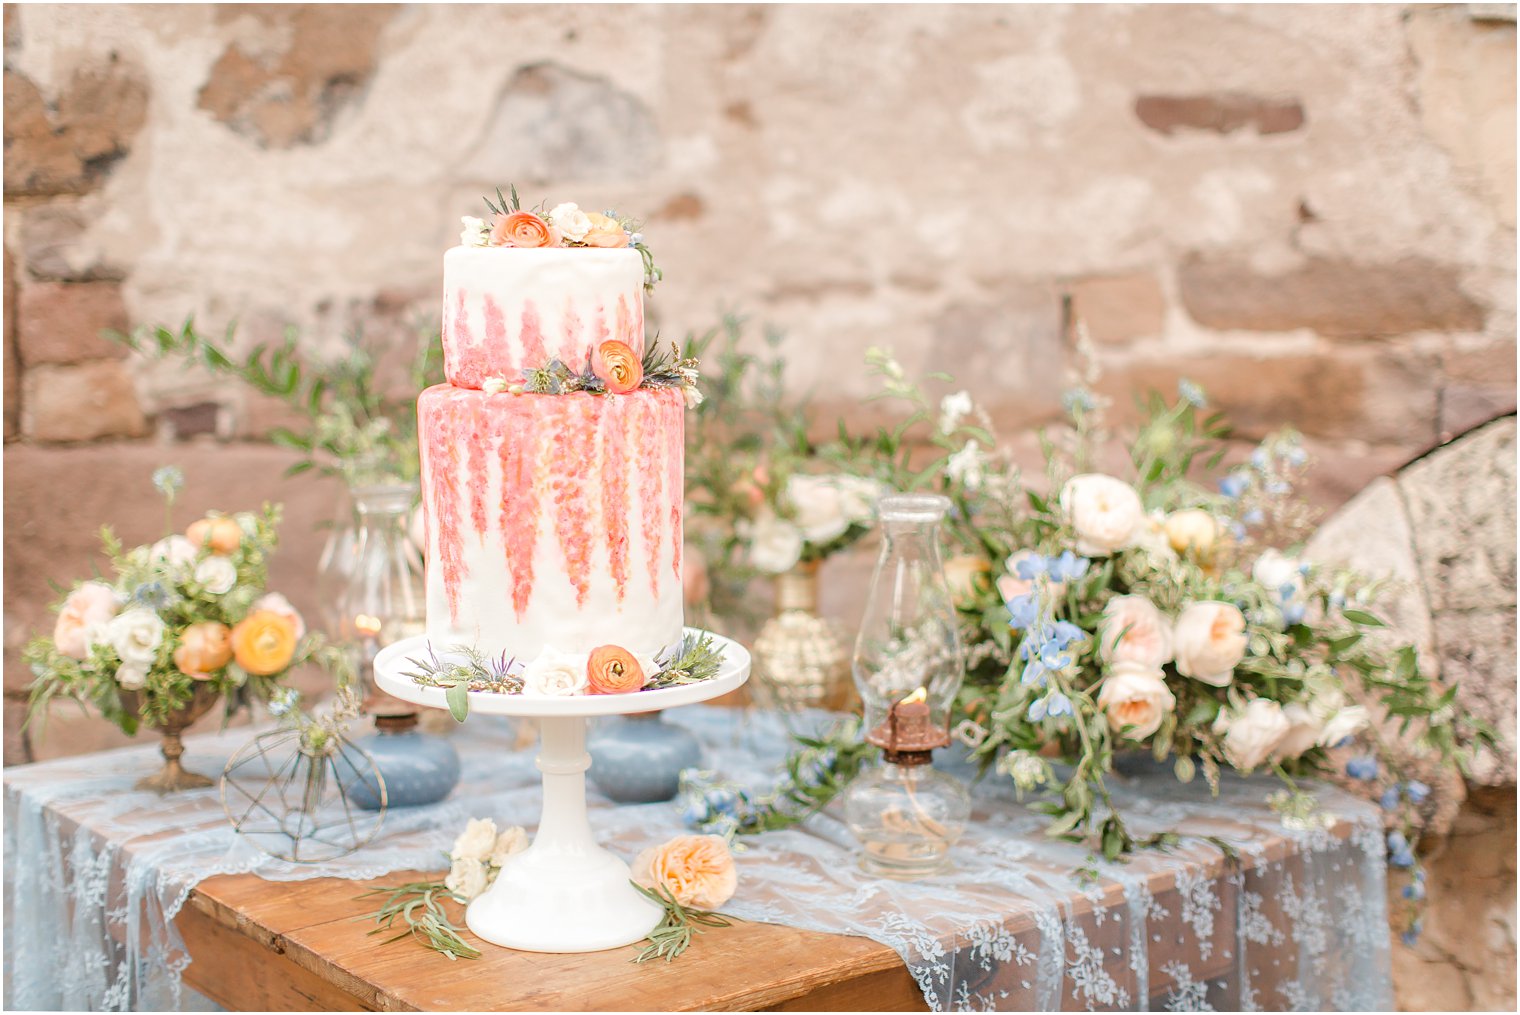 Pink and white tiered wedding cake by Pastry Paige for Prallsville Mills Wedding Editorial